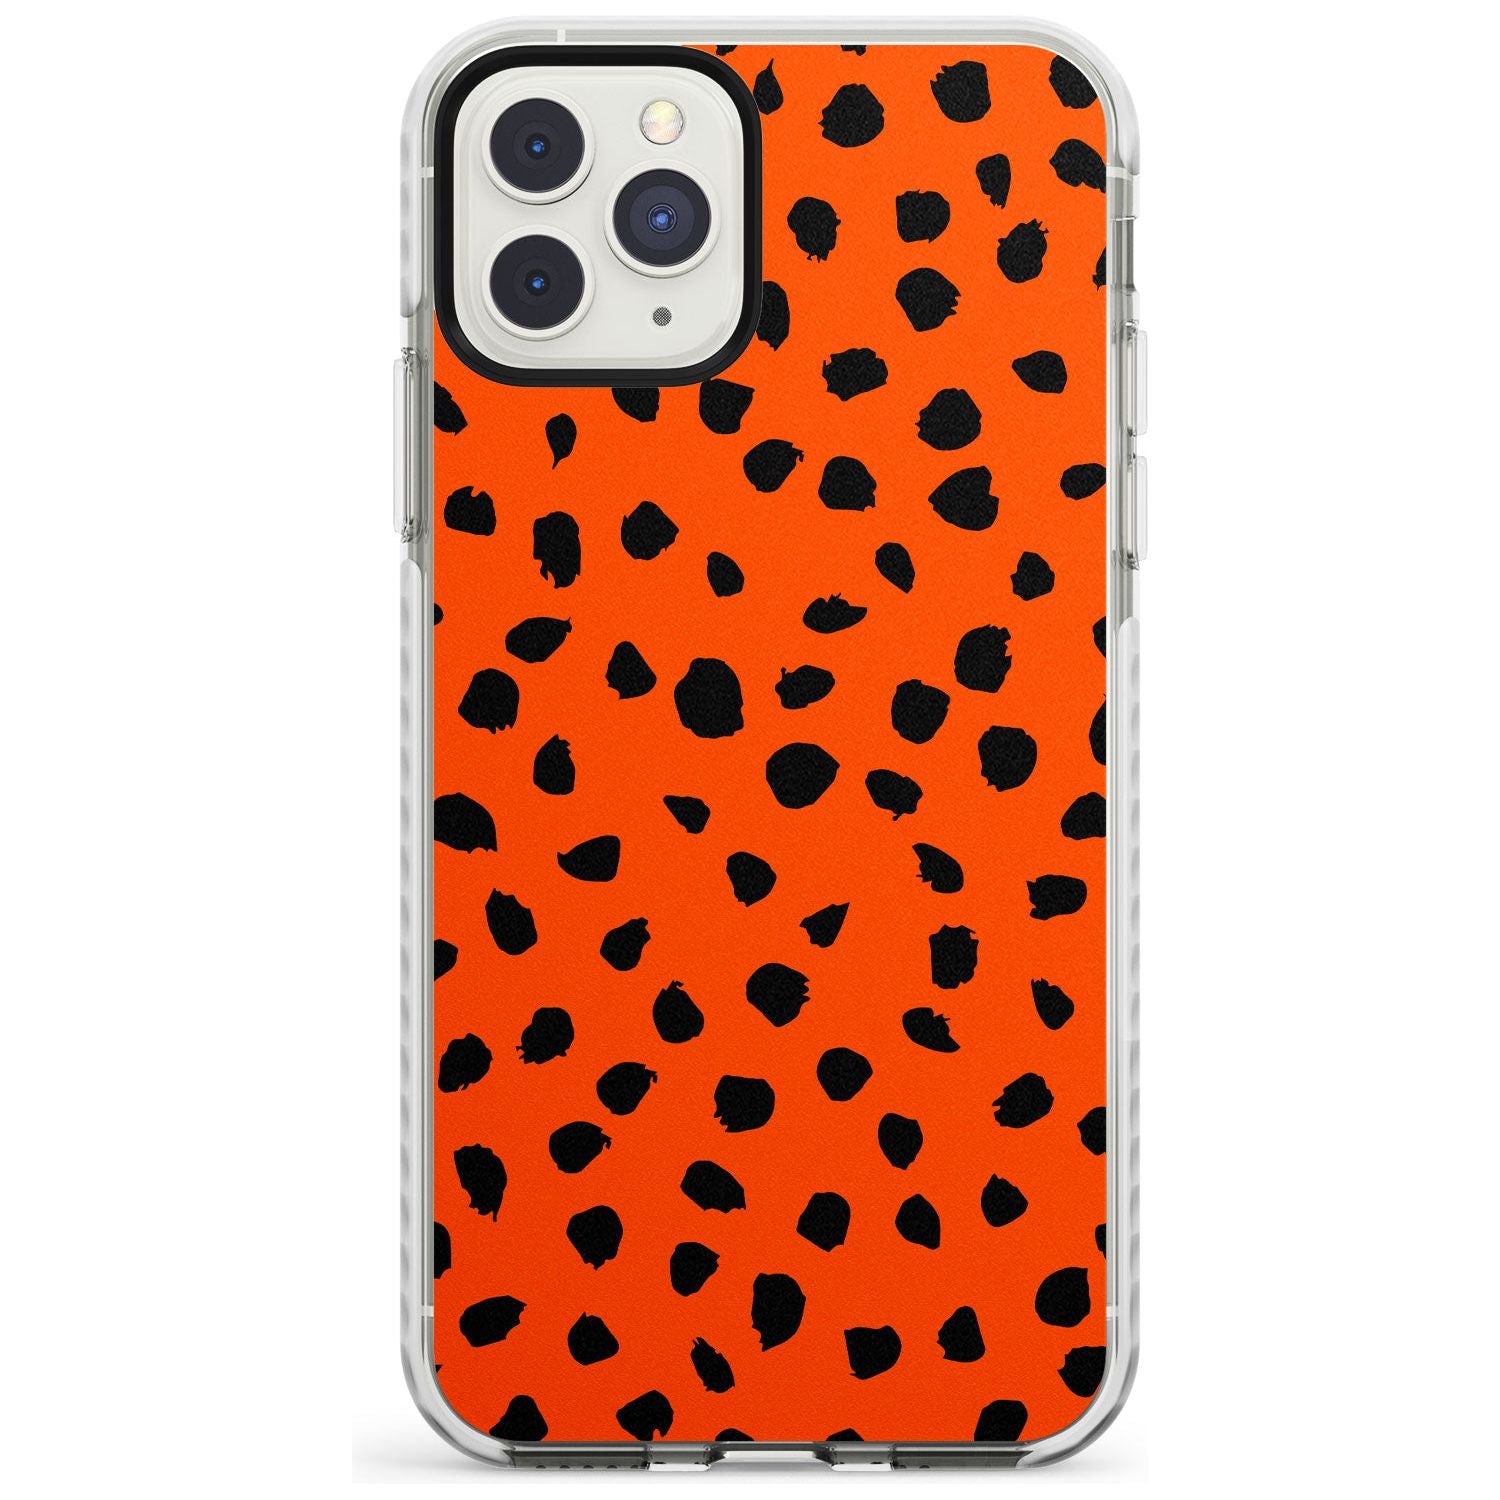 Black & Bright Red Dalmatian Polka Dot Spots Impact Phone Case for iPhone 11 Pro Max